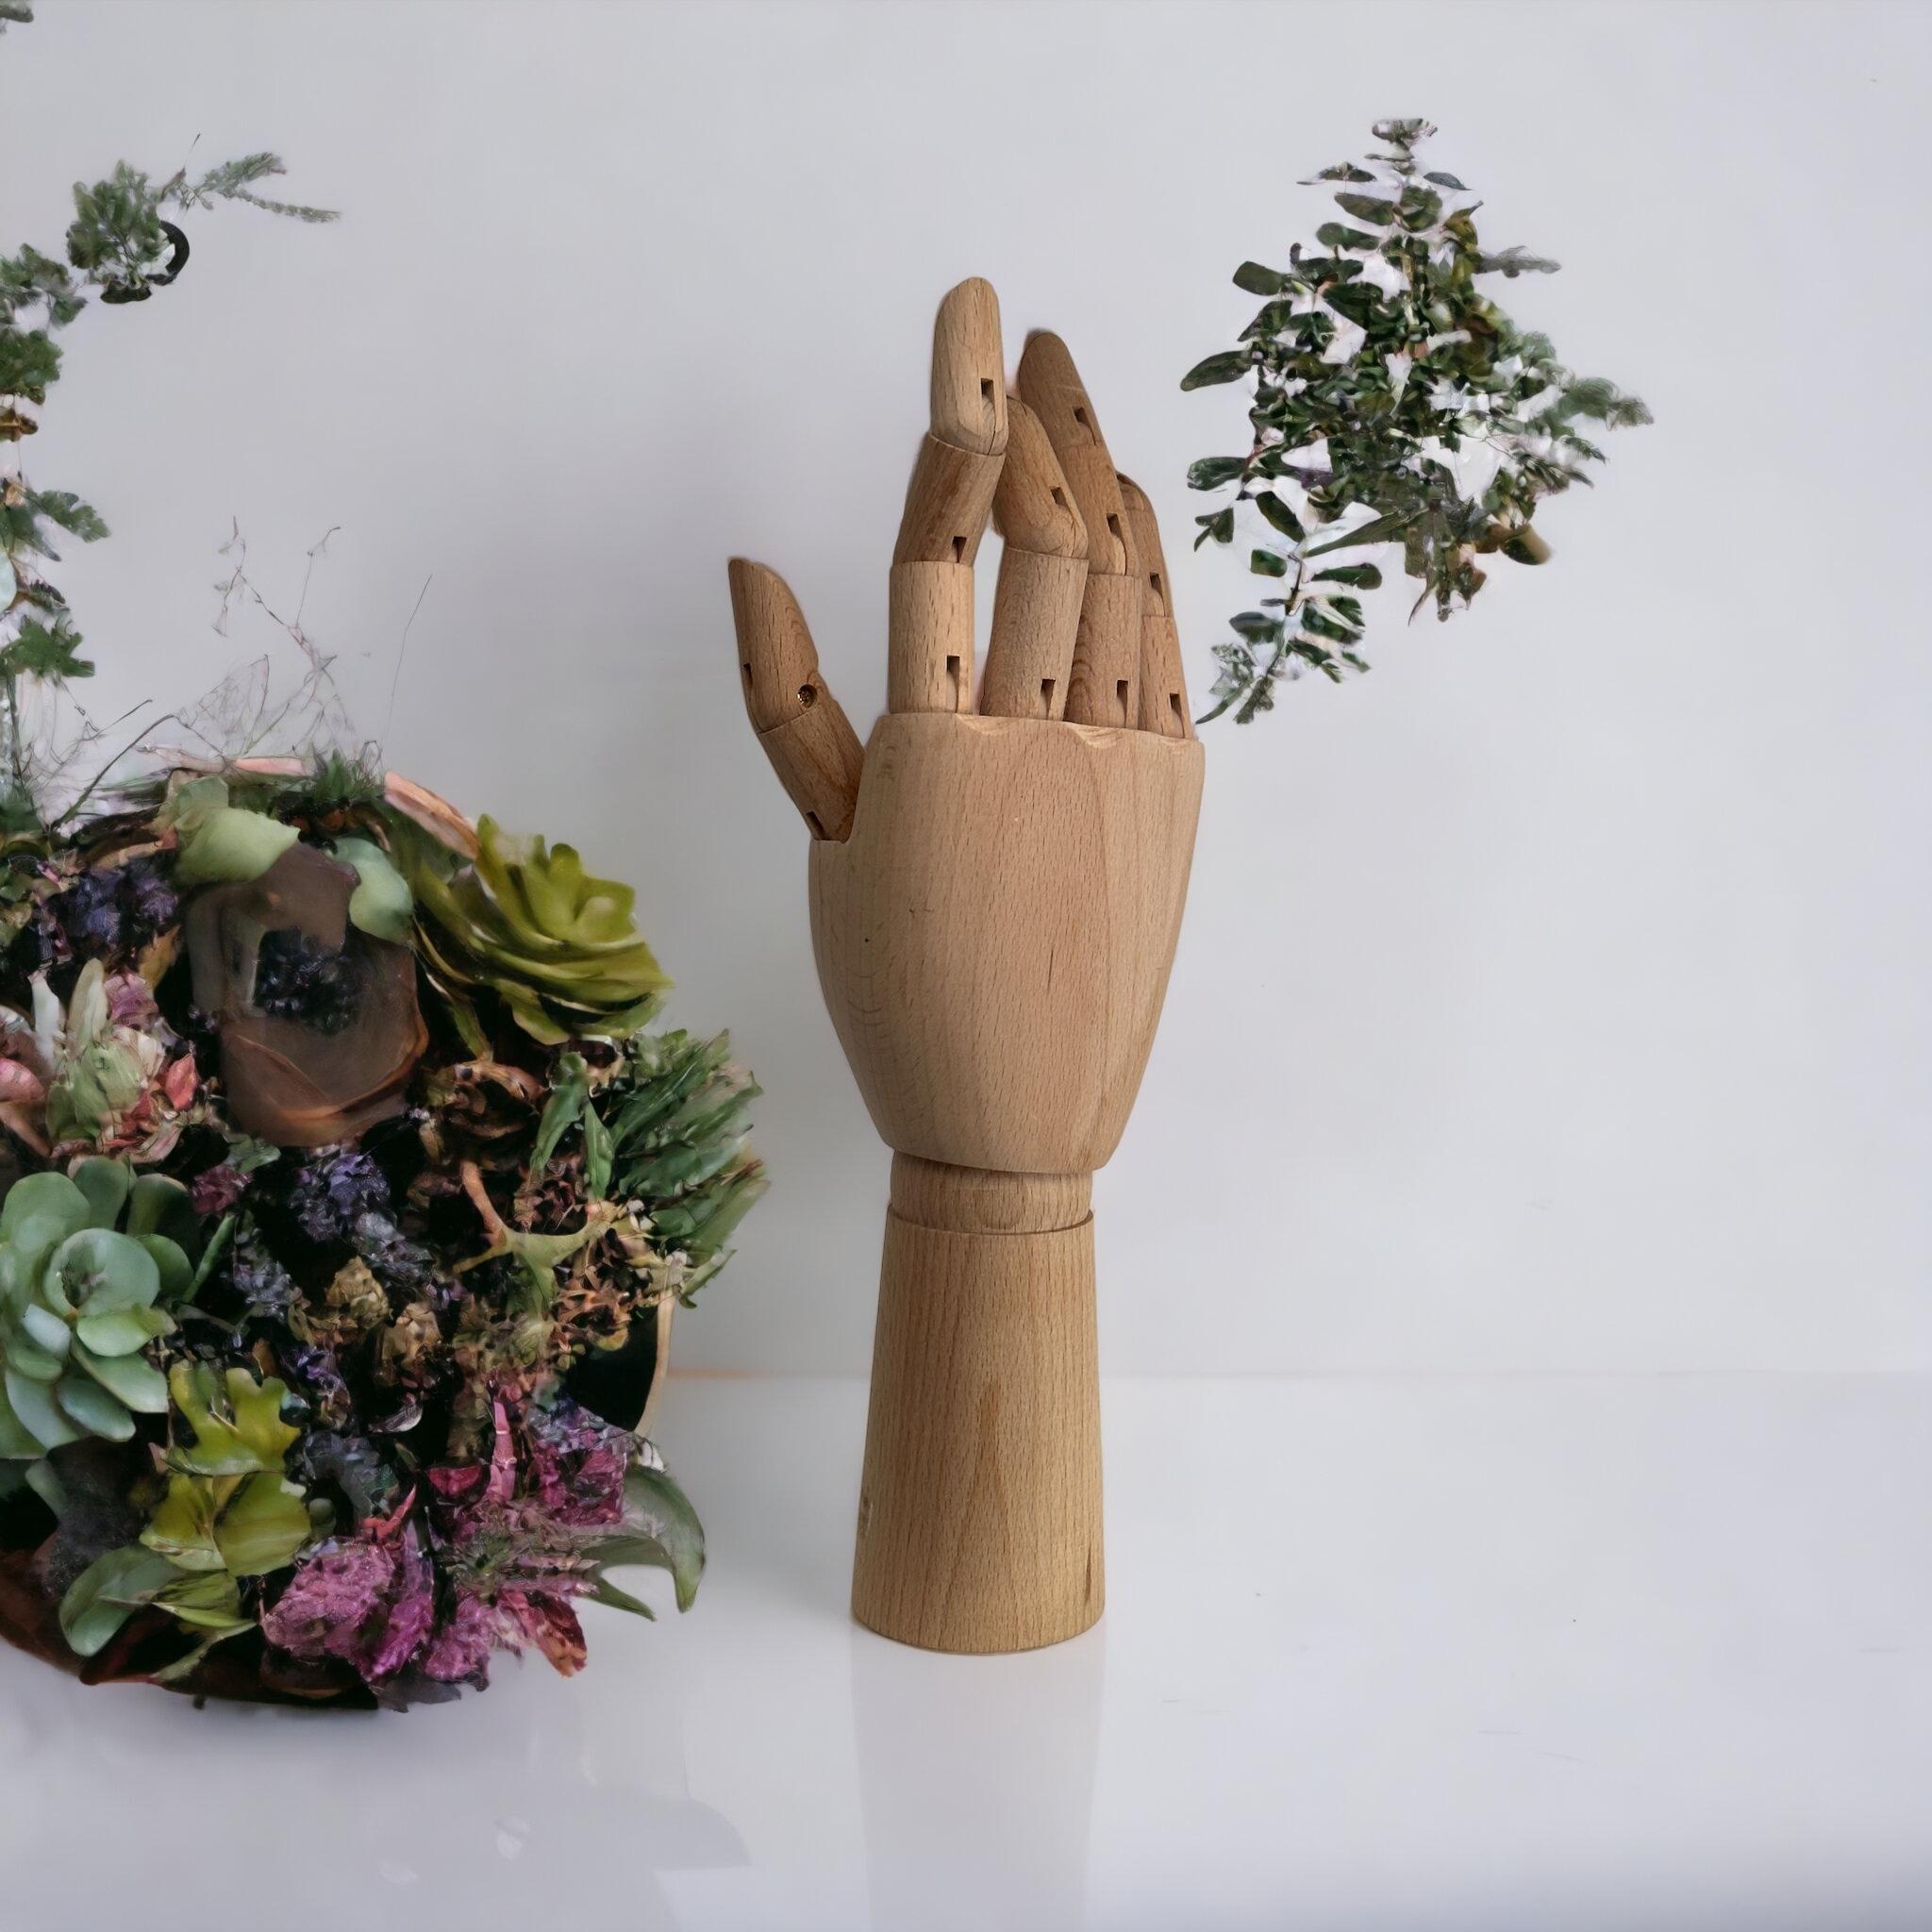 A handmade wooden Artist mannequin hand model - all joints move as they should. Found on an Estate sale in Vienna, Austria.
Shows some minor wear - but looks beautiful on display! Some scratches and a nice patina due to the age.